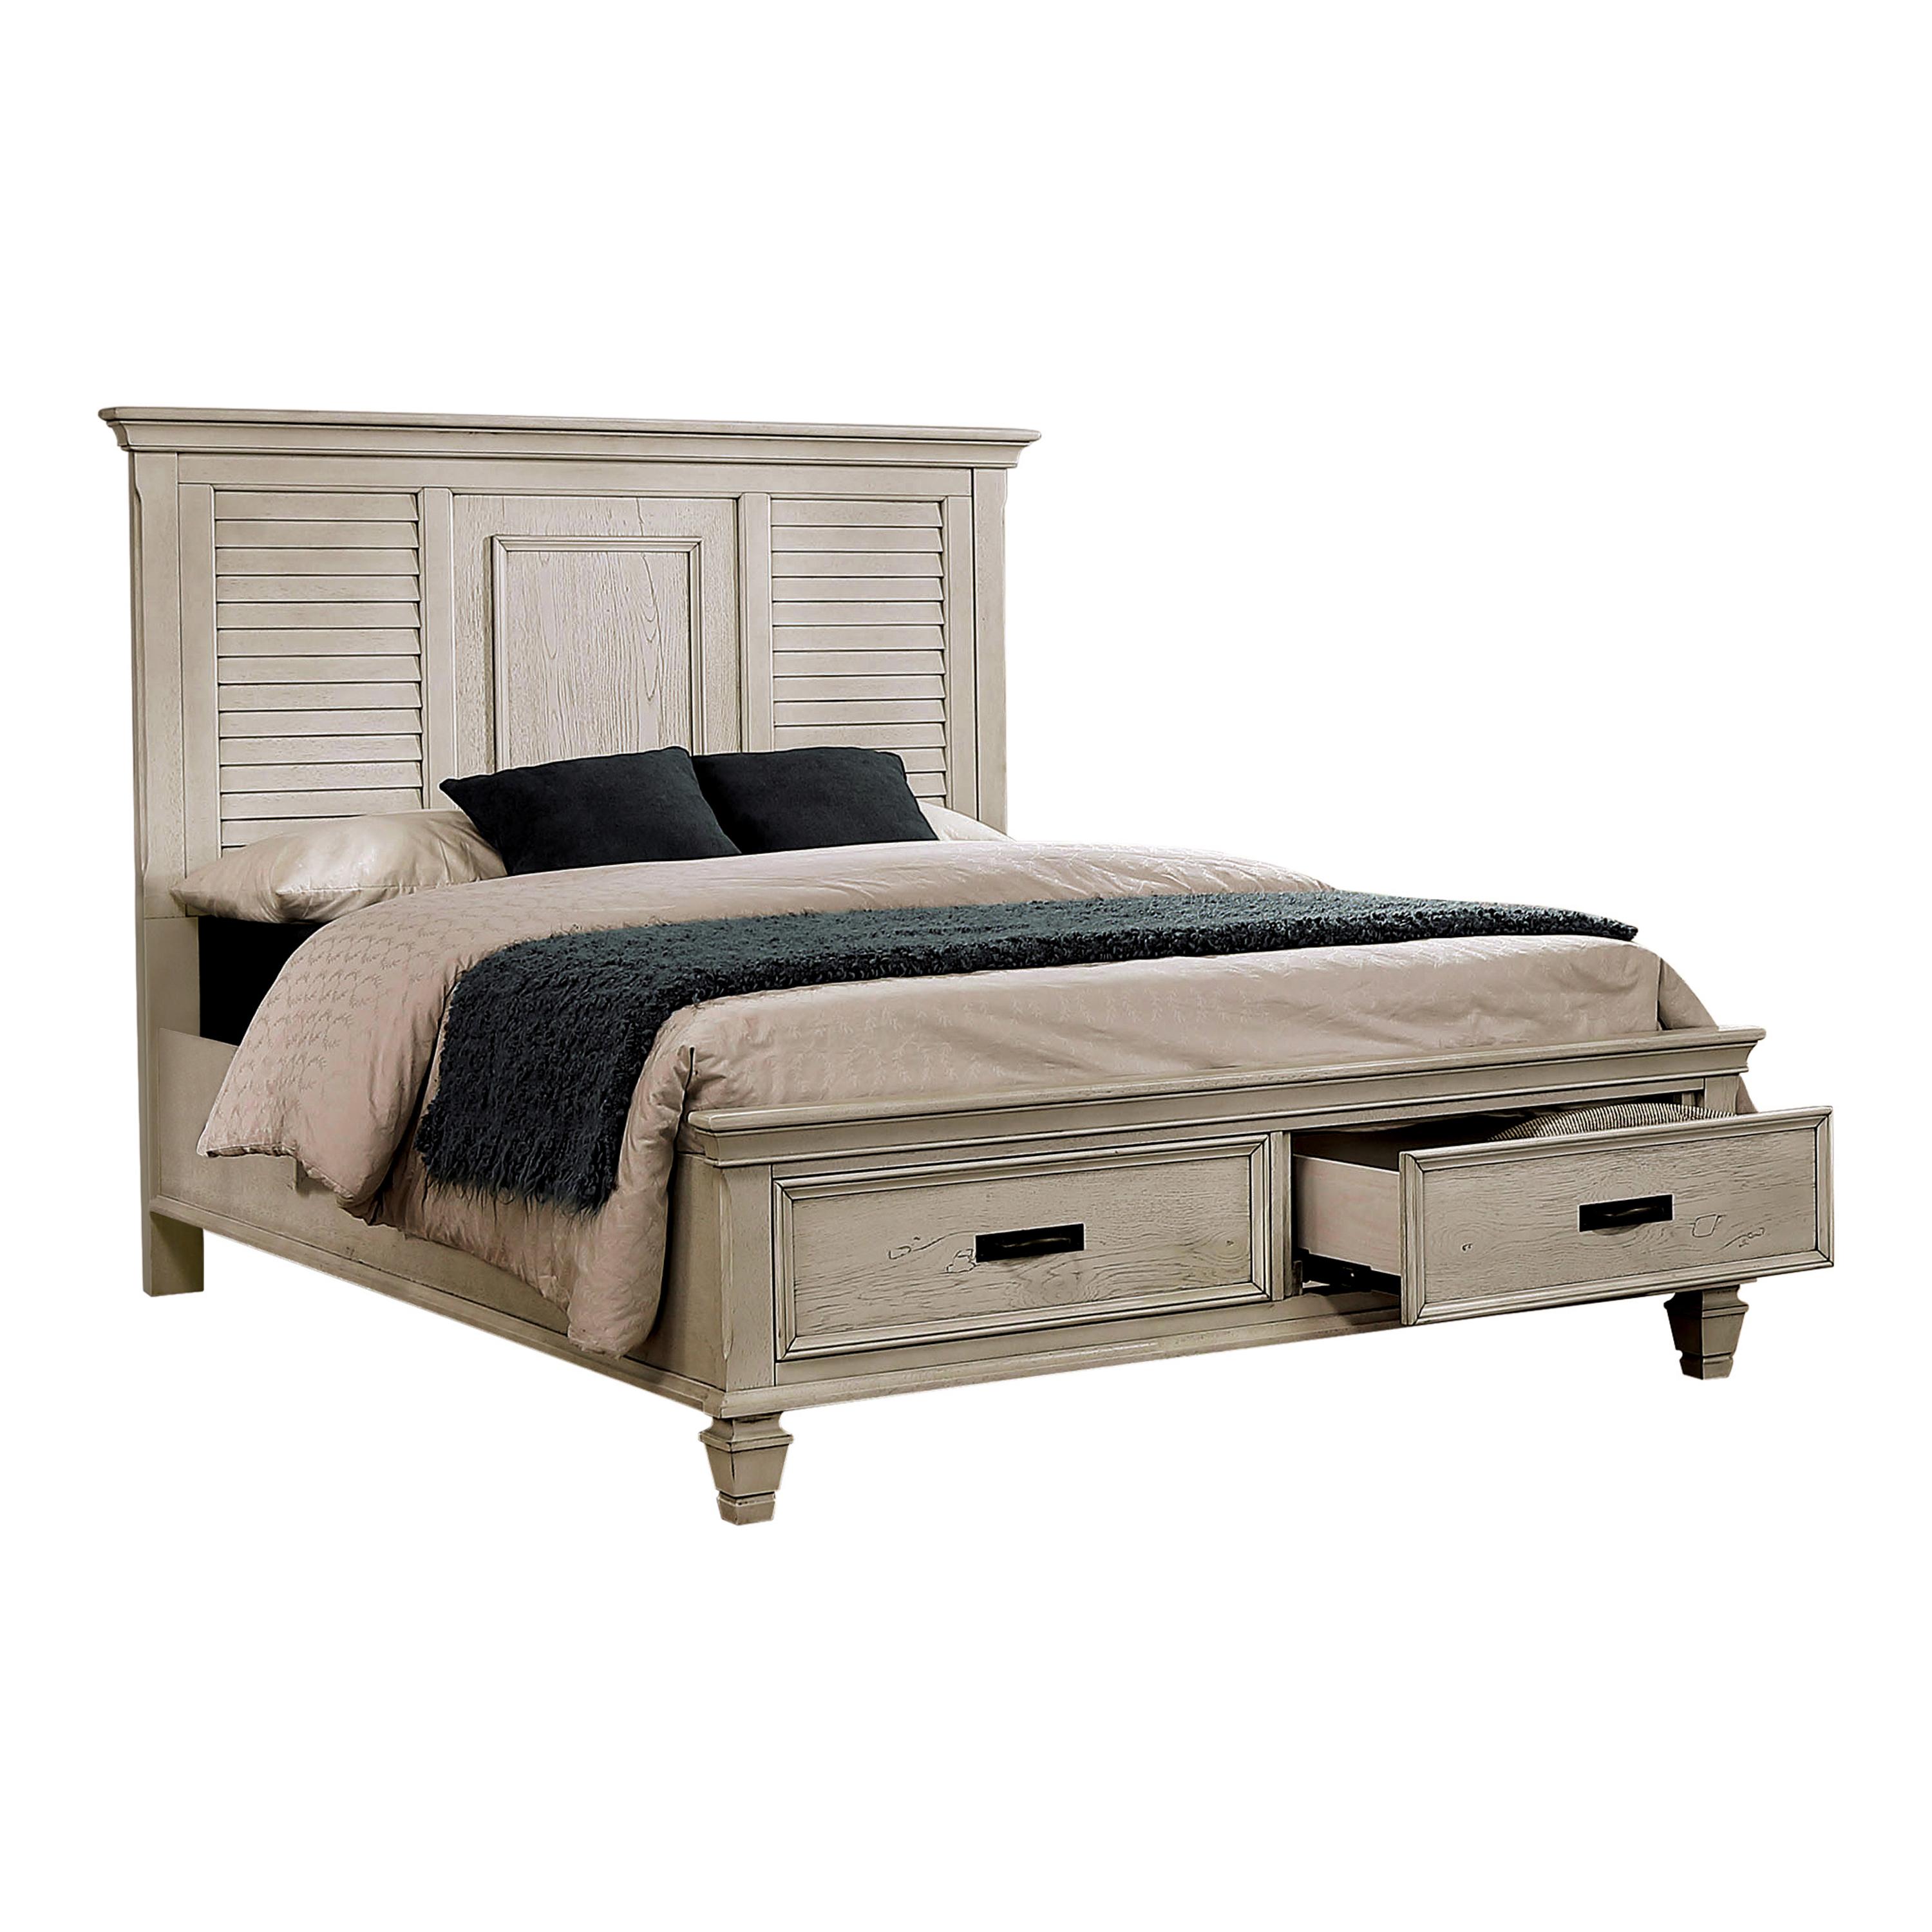 Transitional Storage Bed 205330Q Franco 205330Q in Antique White 